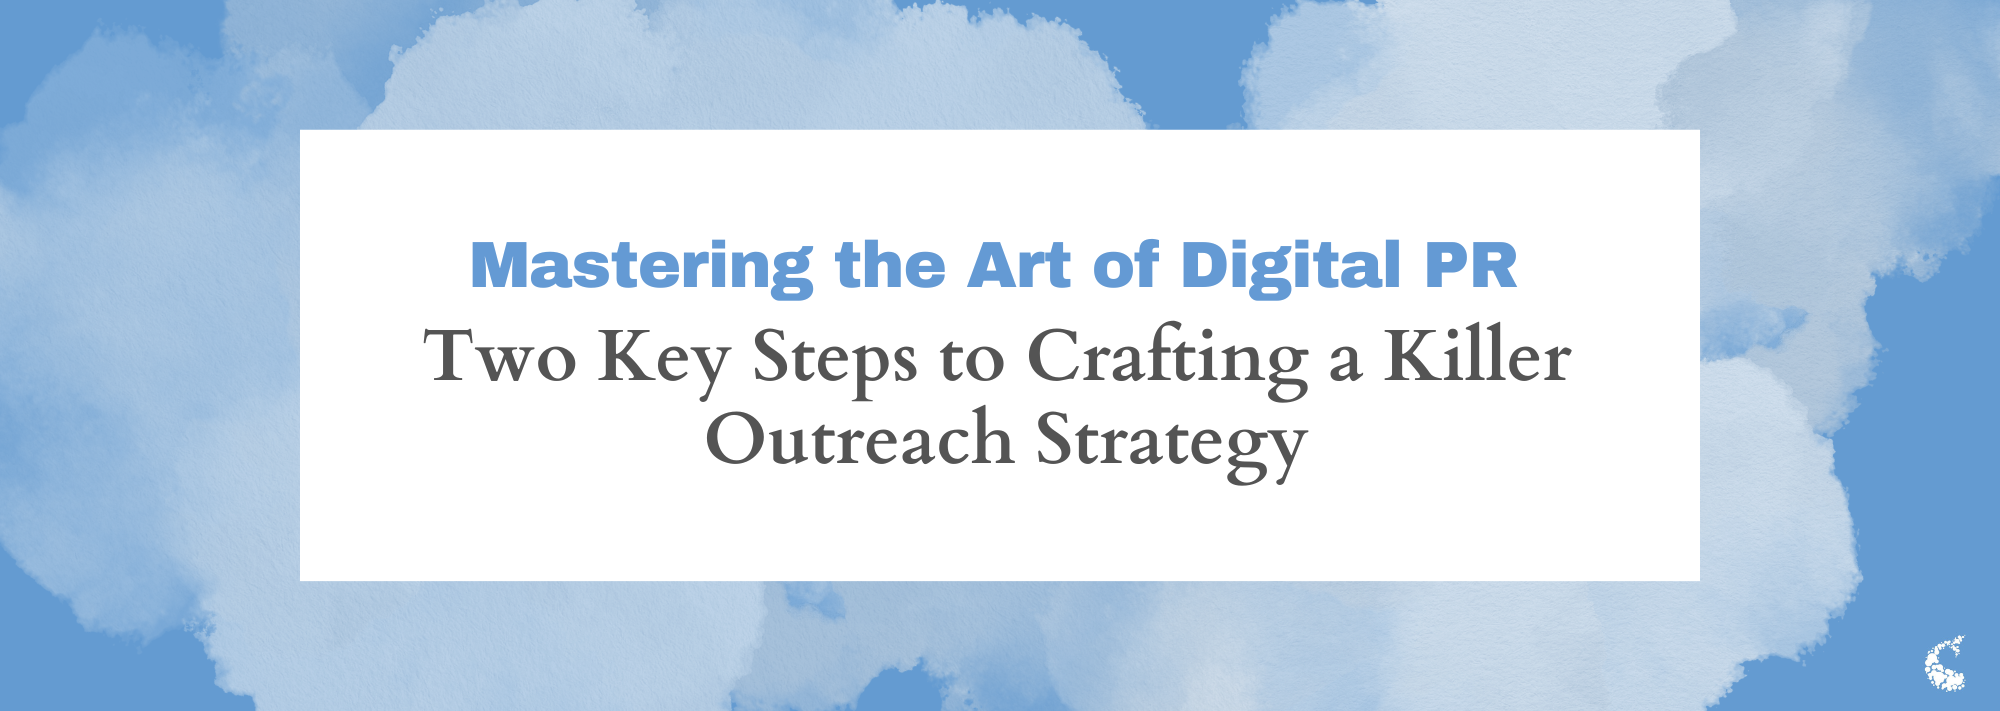 Mastering the Art of Digital PR: Two Key Steps to Crafting a Killer Outreach Strategy